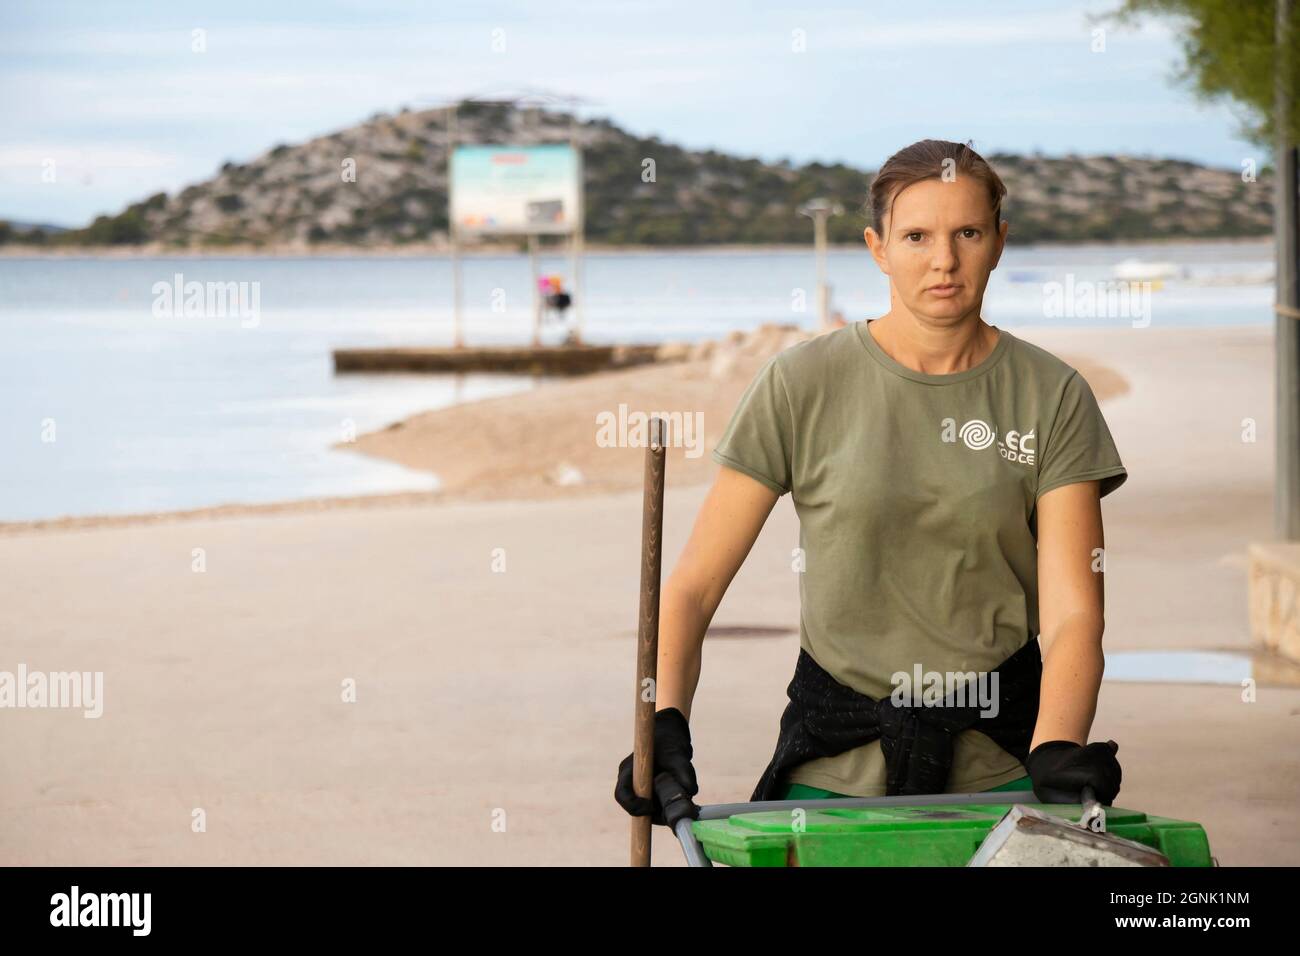 Vodice, Croatia - August 28, 2021: Young woman cleaner, working for Lec city service, on her morning duty routine cleaning the beach Stock Photo